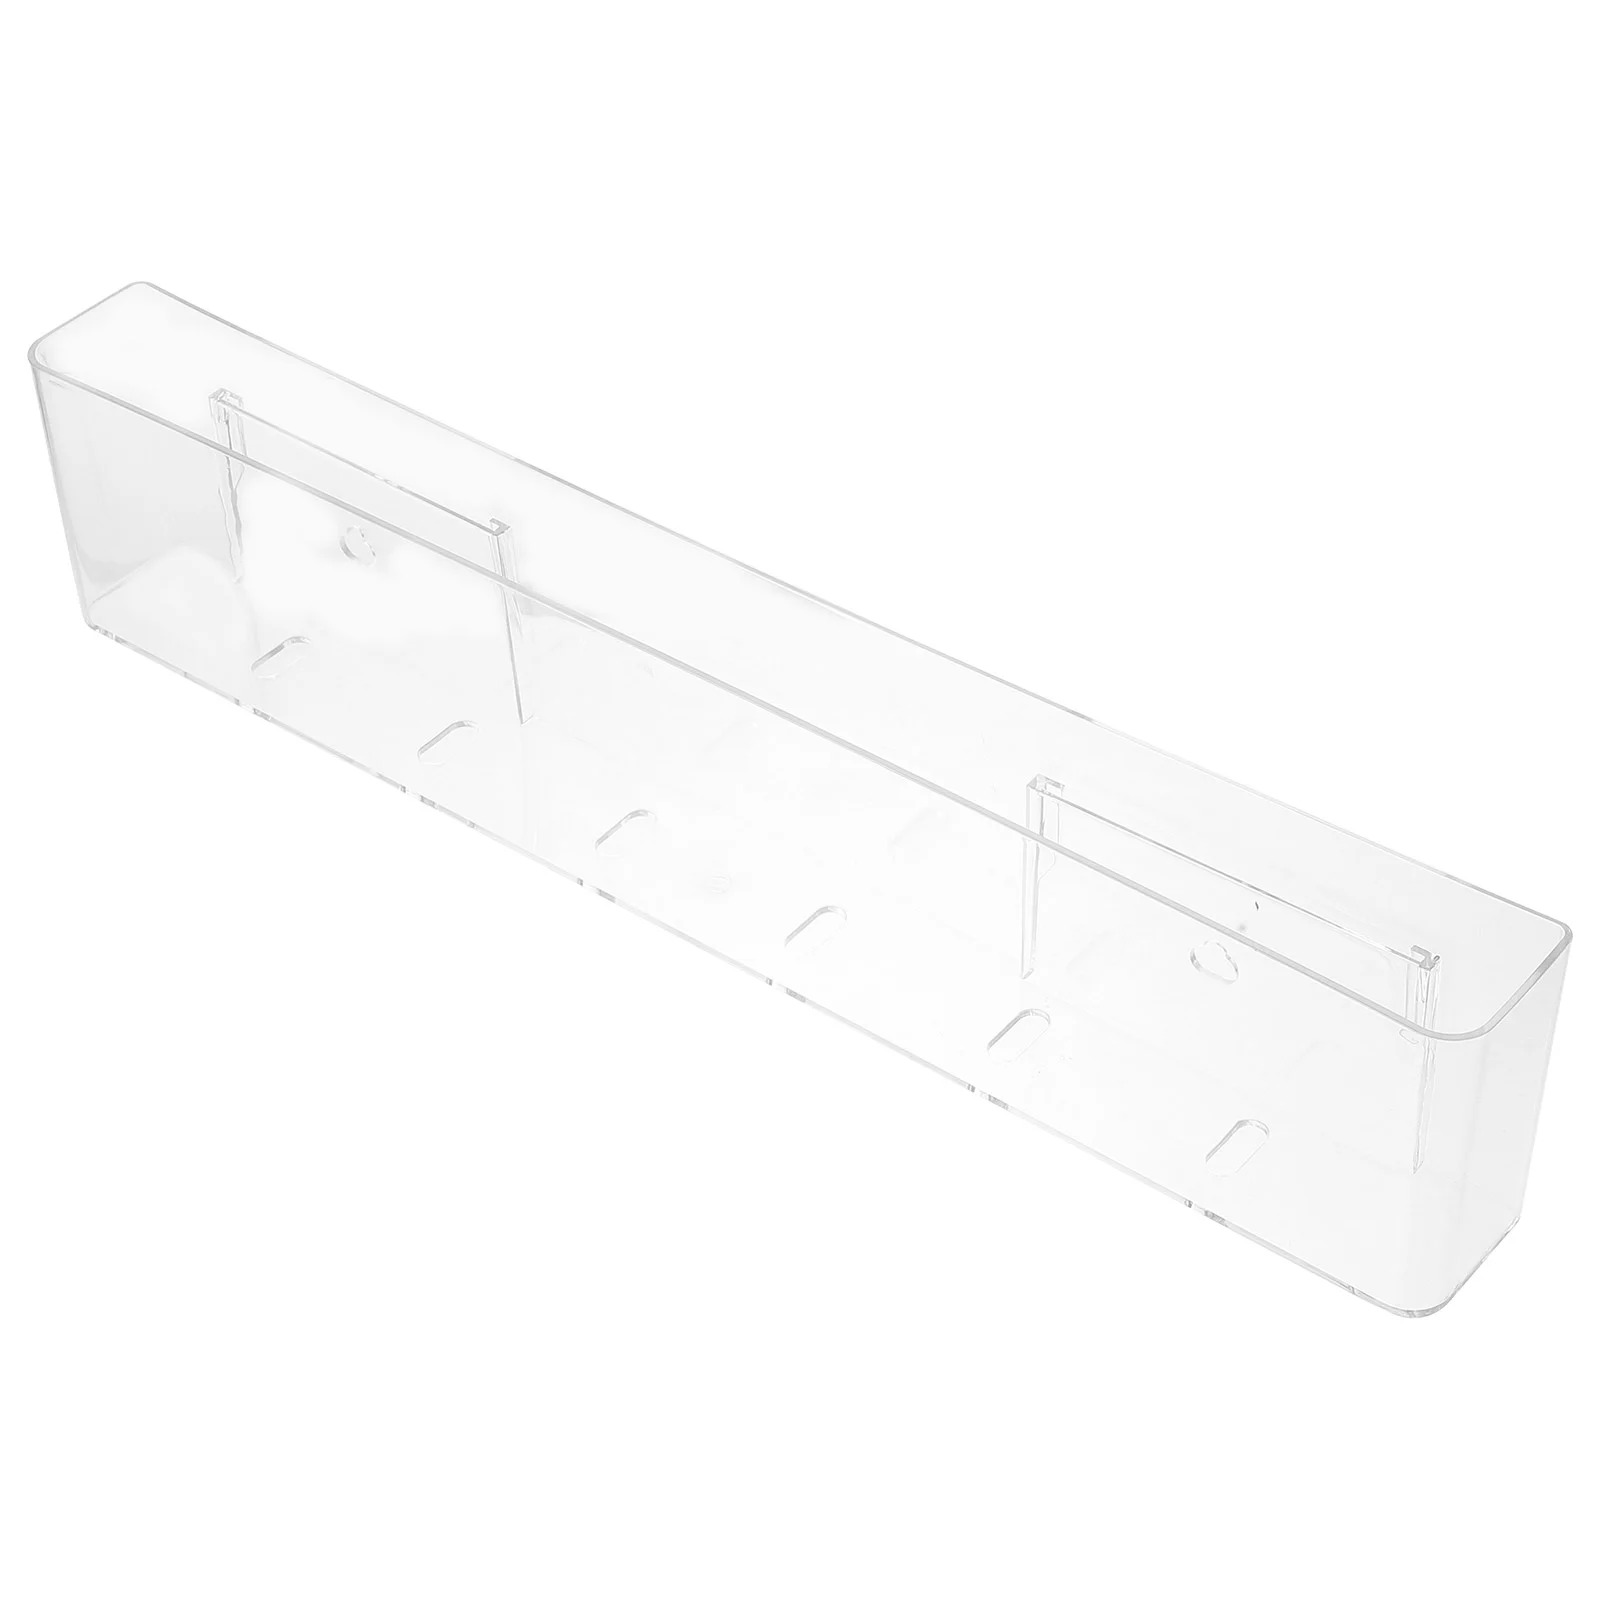 

Acrylic CD Stand Racks DVD Home Decorative Card Holder Storage Units DVDs Exquisite Display